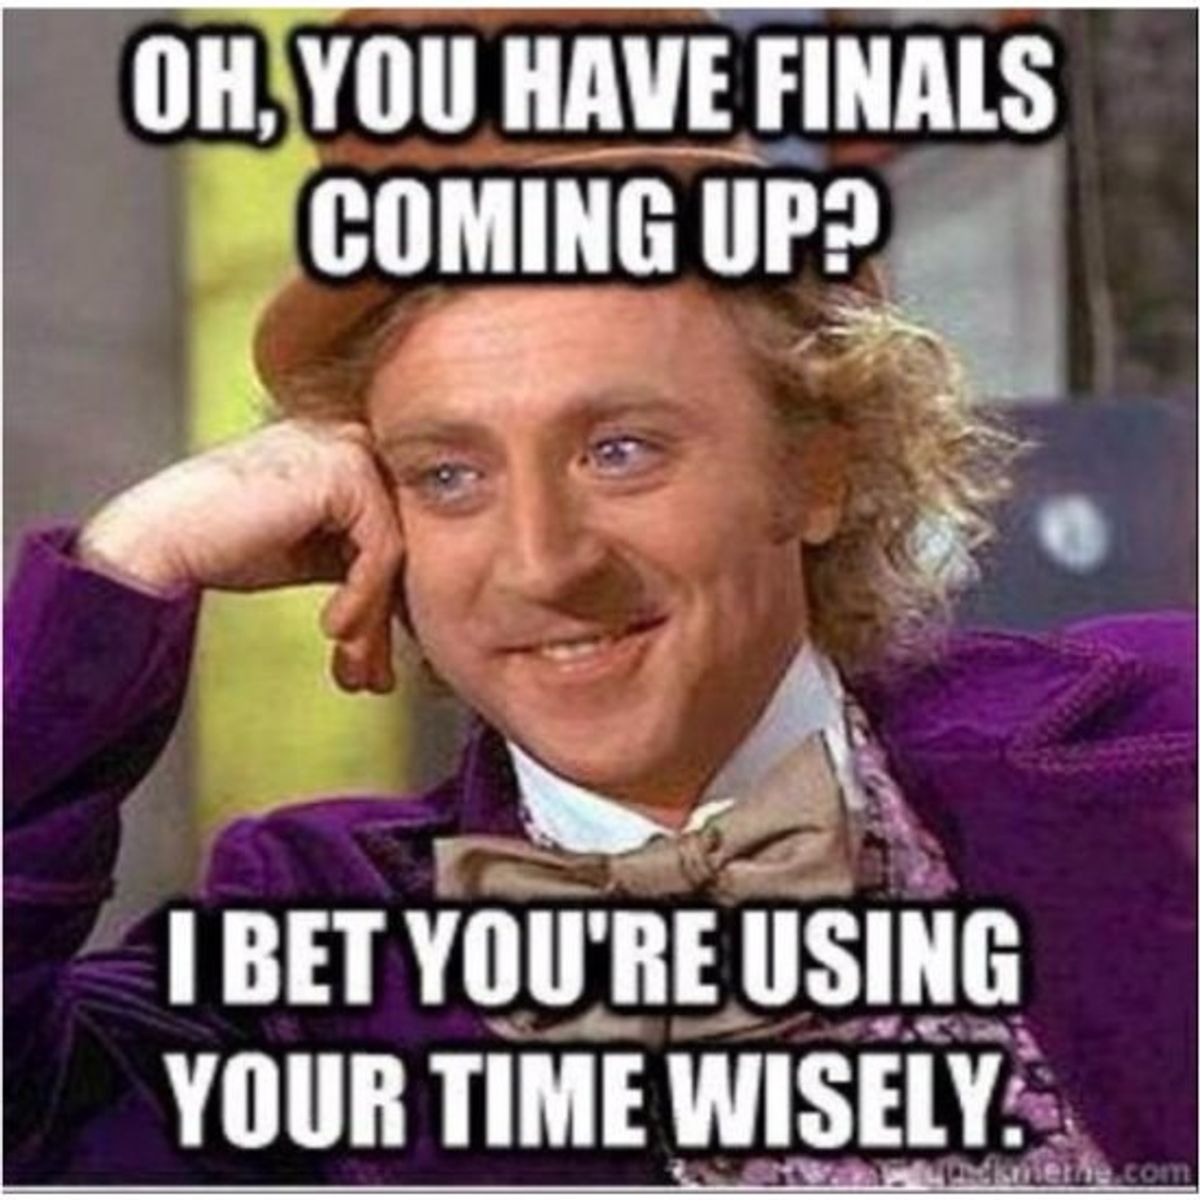 The 4 Most Important Things You Need to Remember for Finals Week